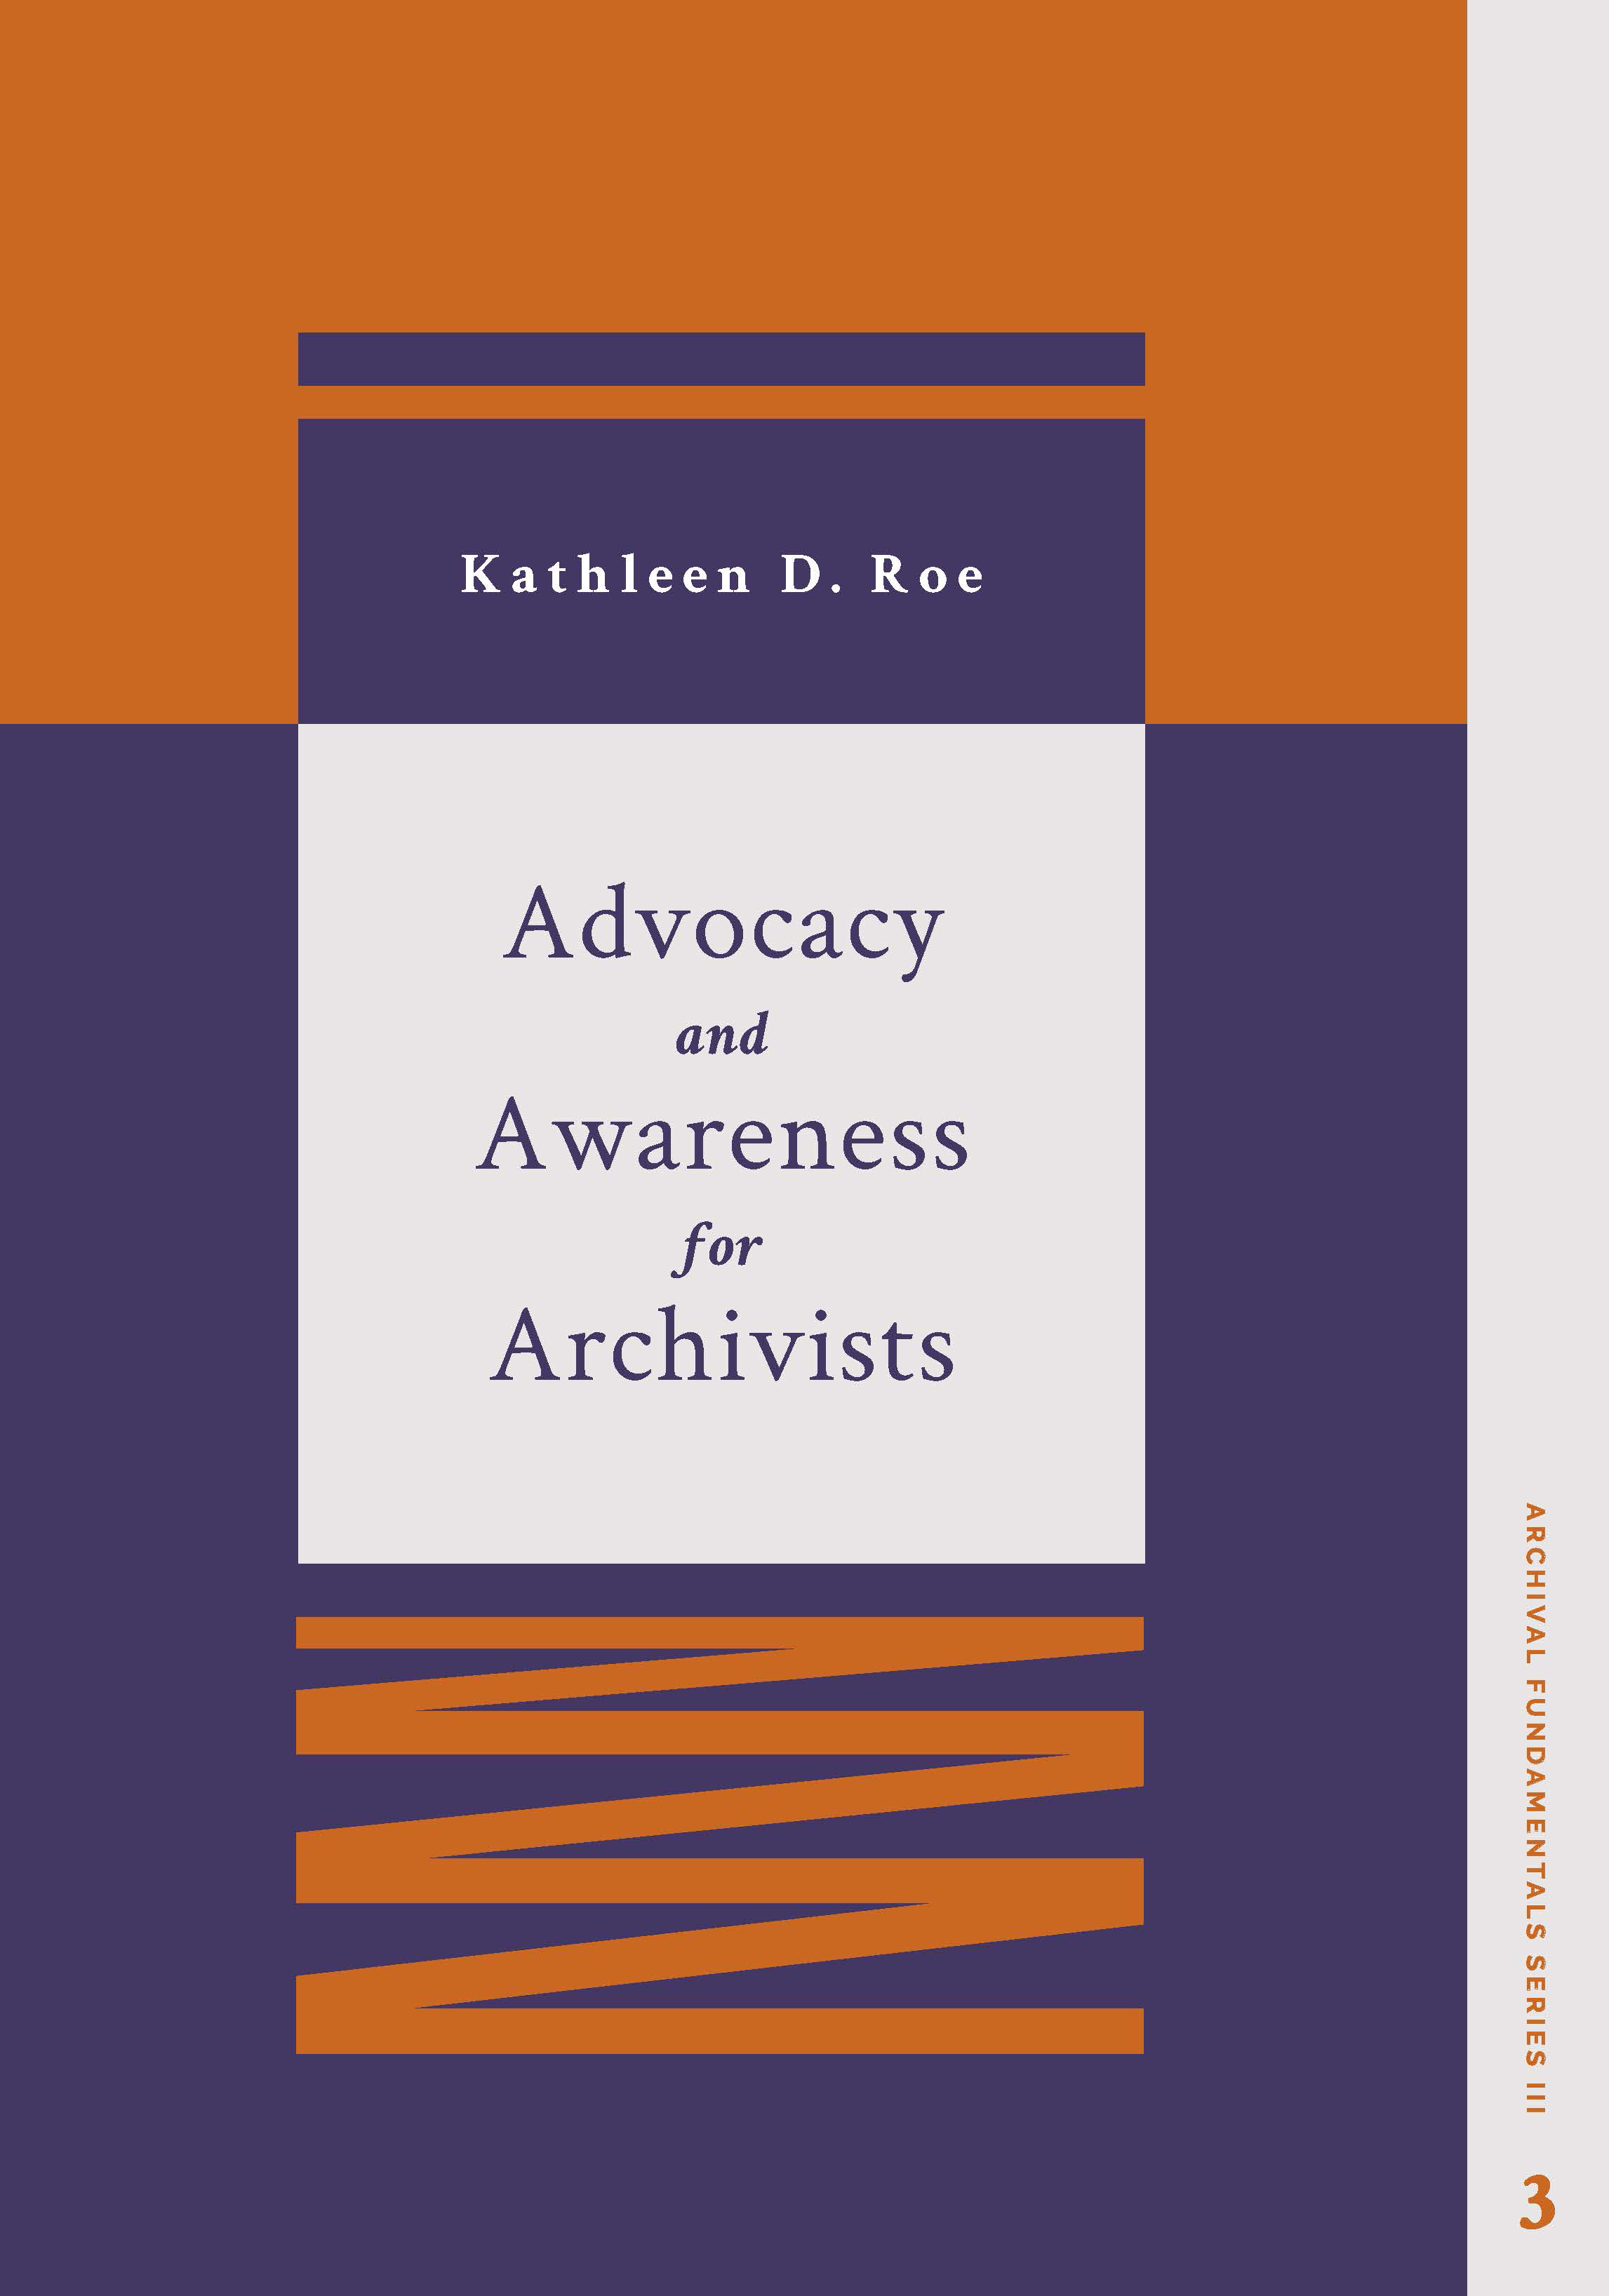 Advocacy and Awareness for Archivists